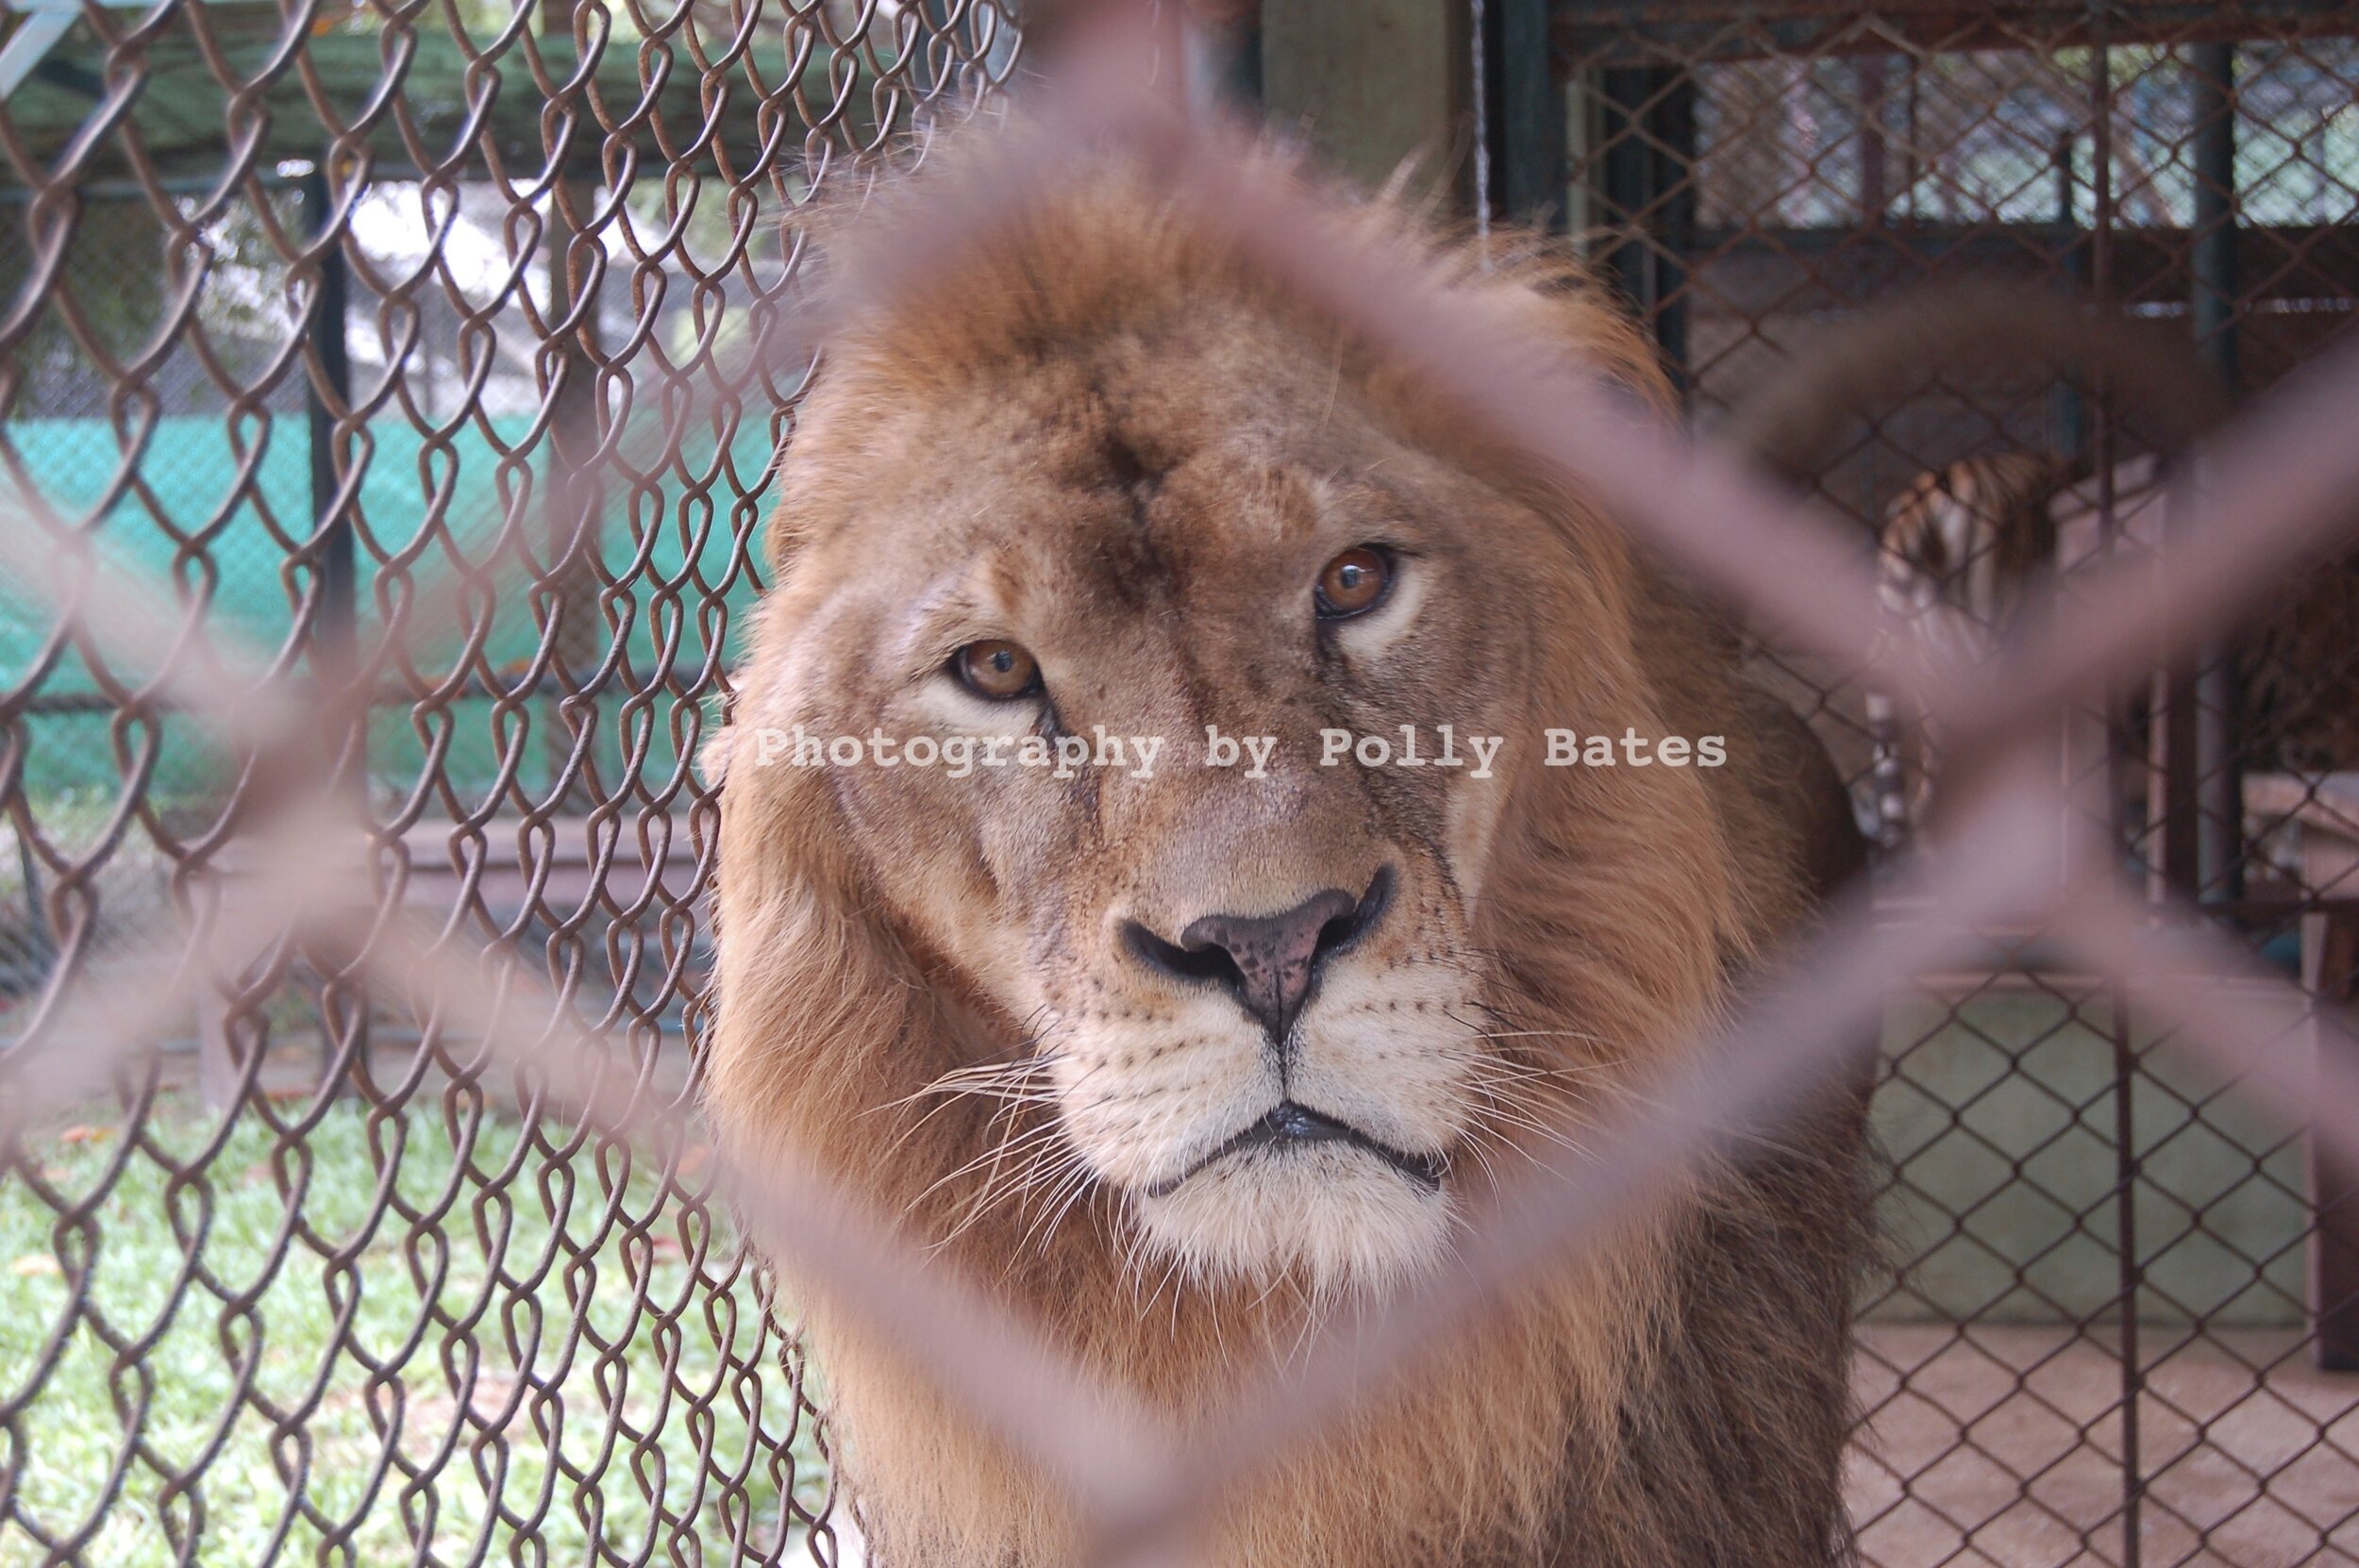 Polly Bates Caged Lion Photography 4.jpg